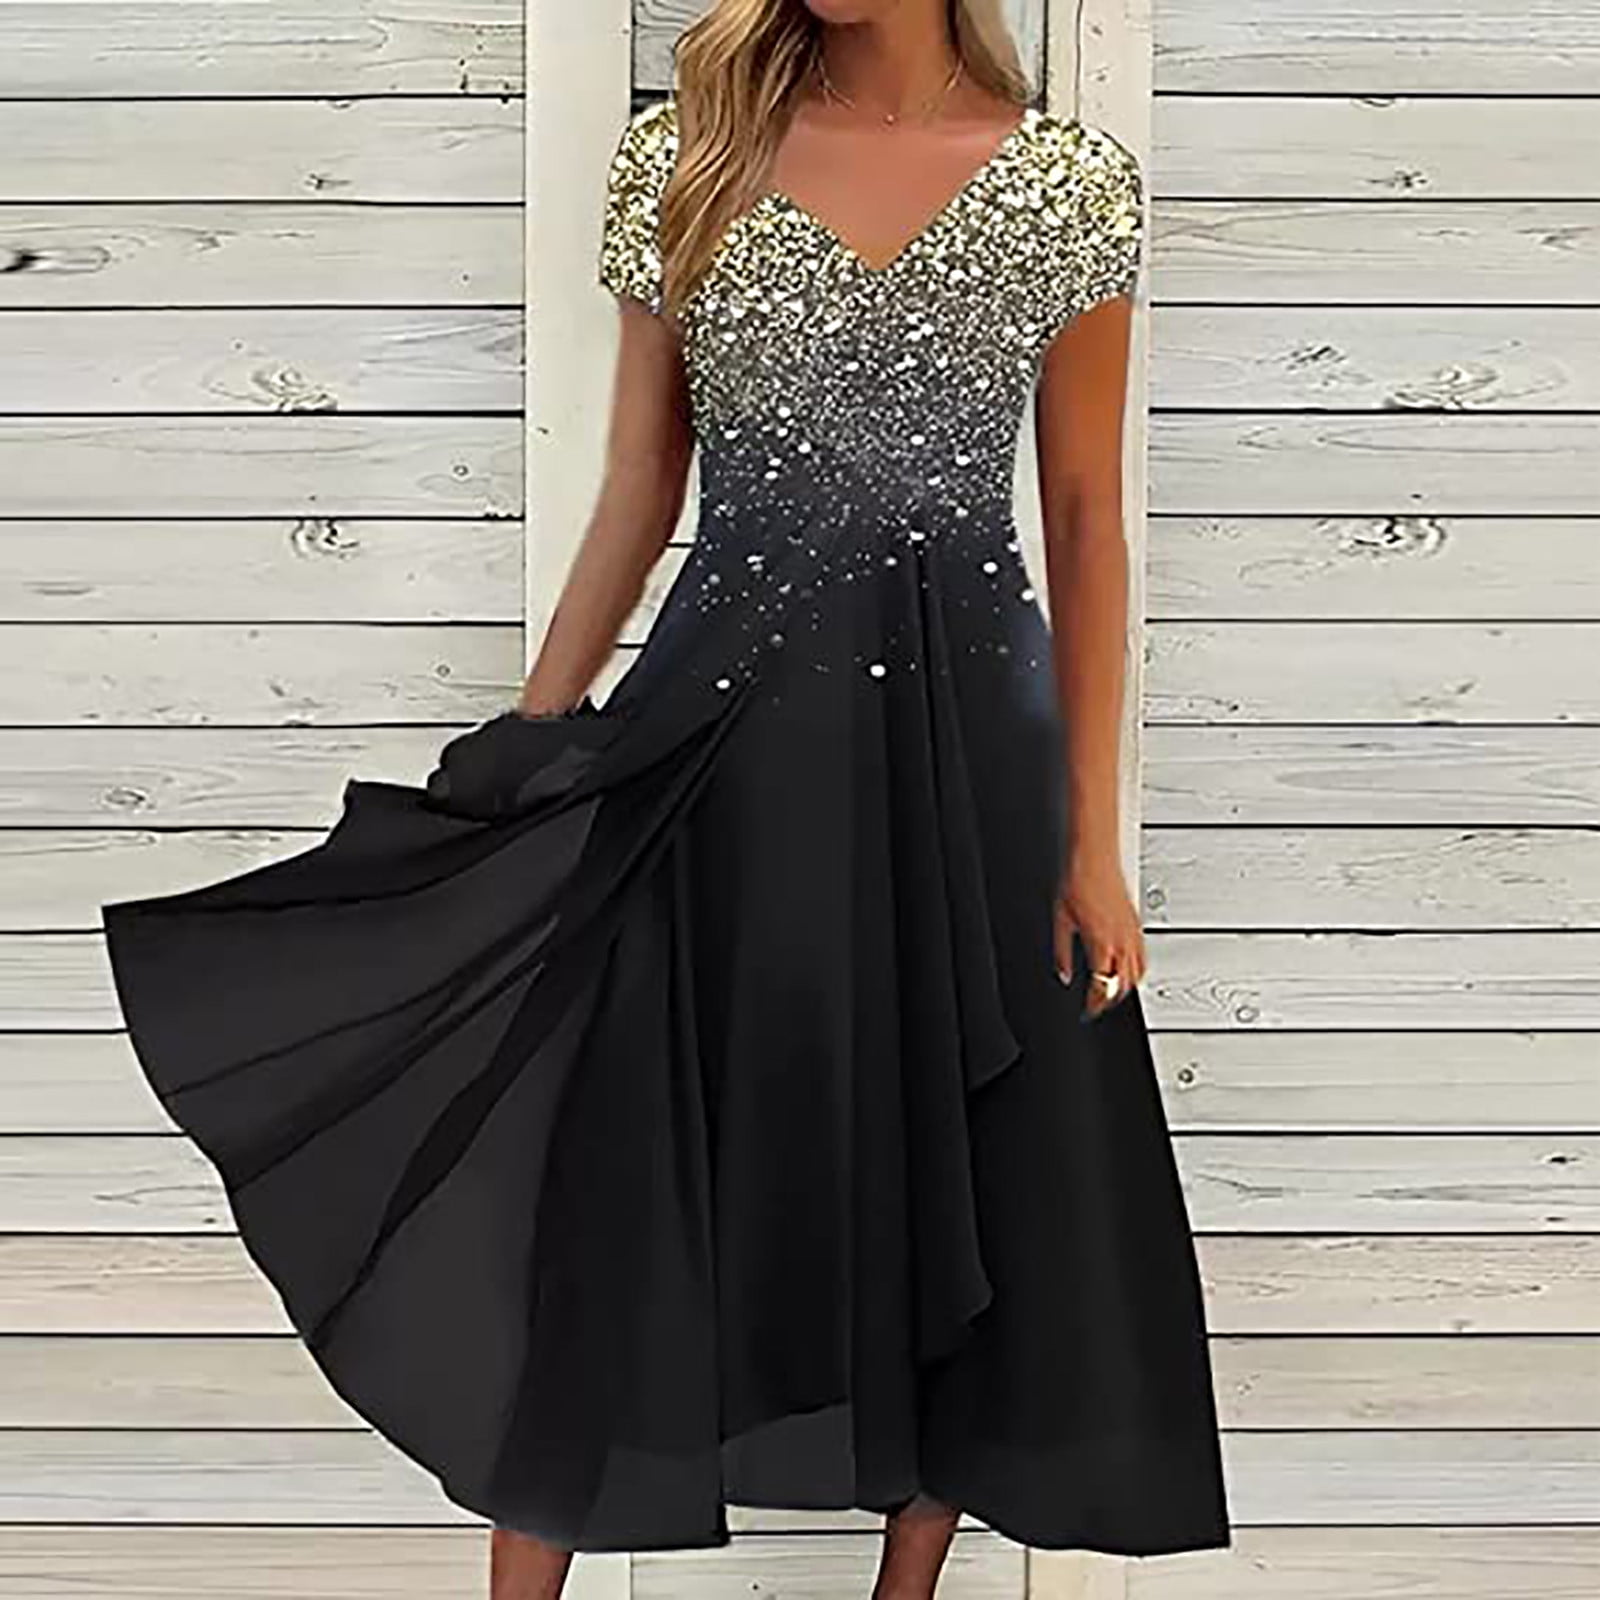 cllios Clearance Clothes Under $5 Wedding Guest Dresses Women Formal V ...